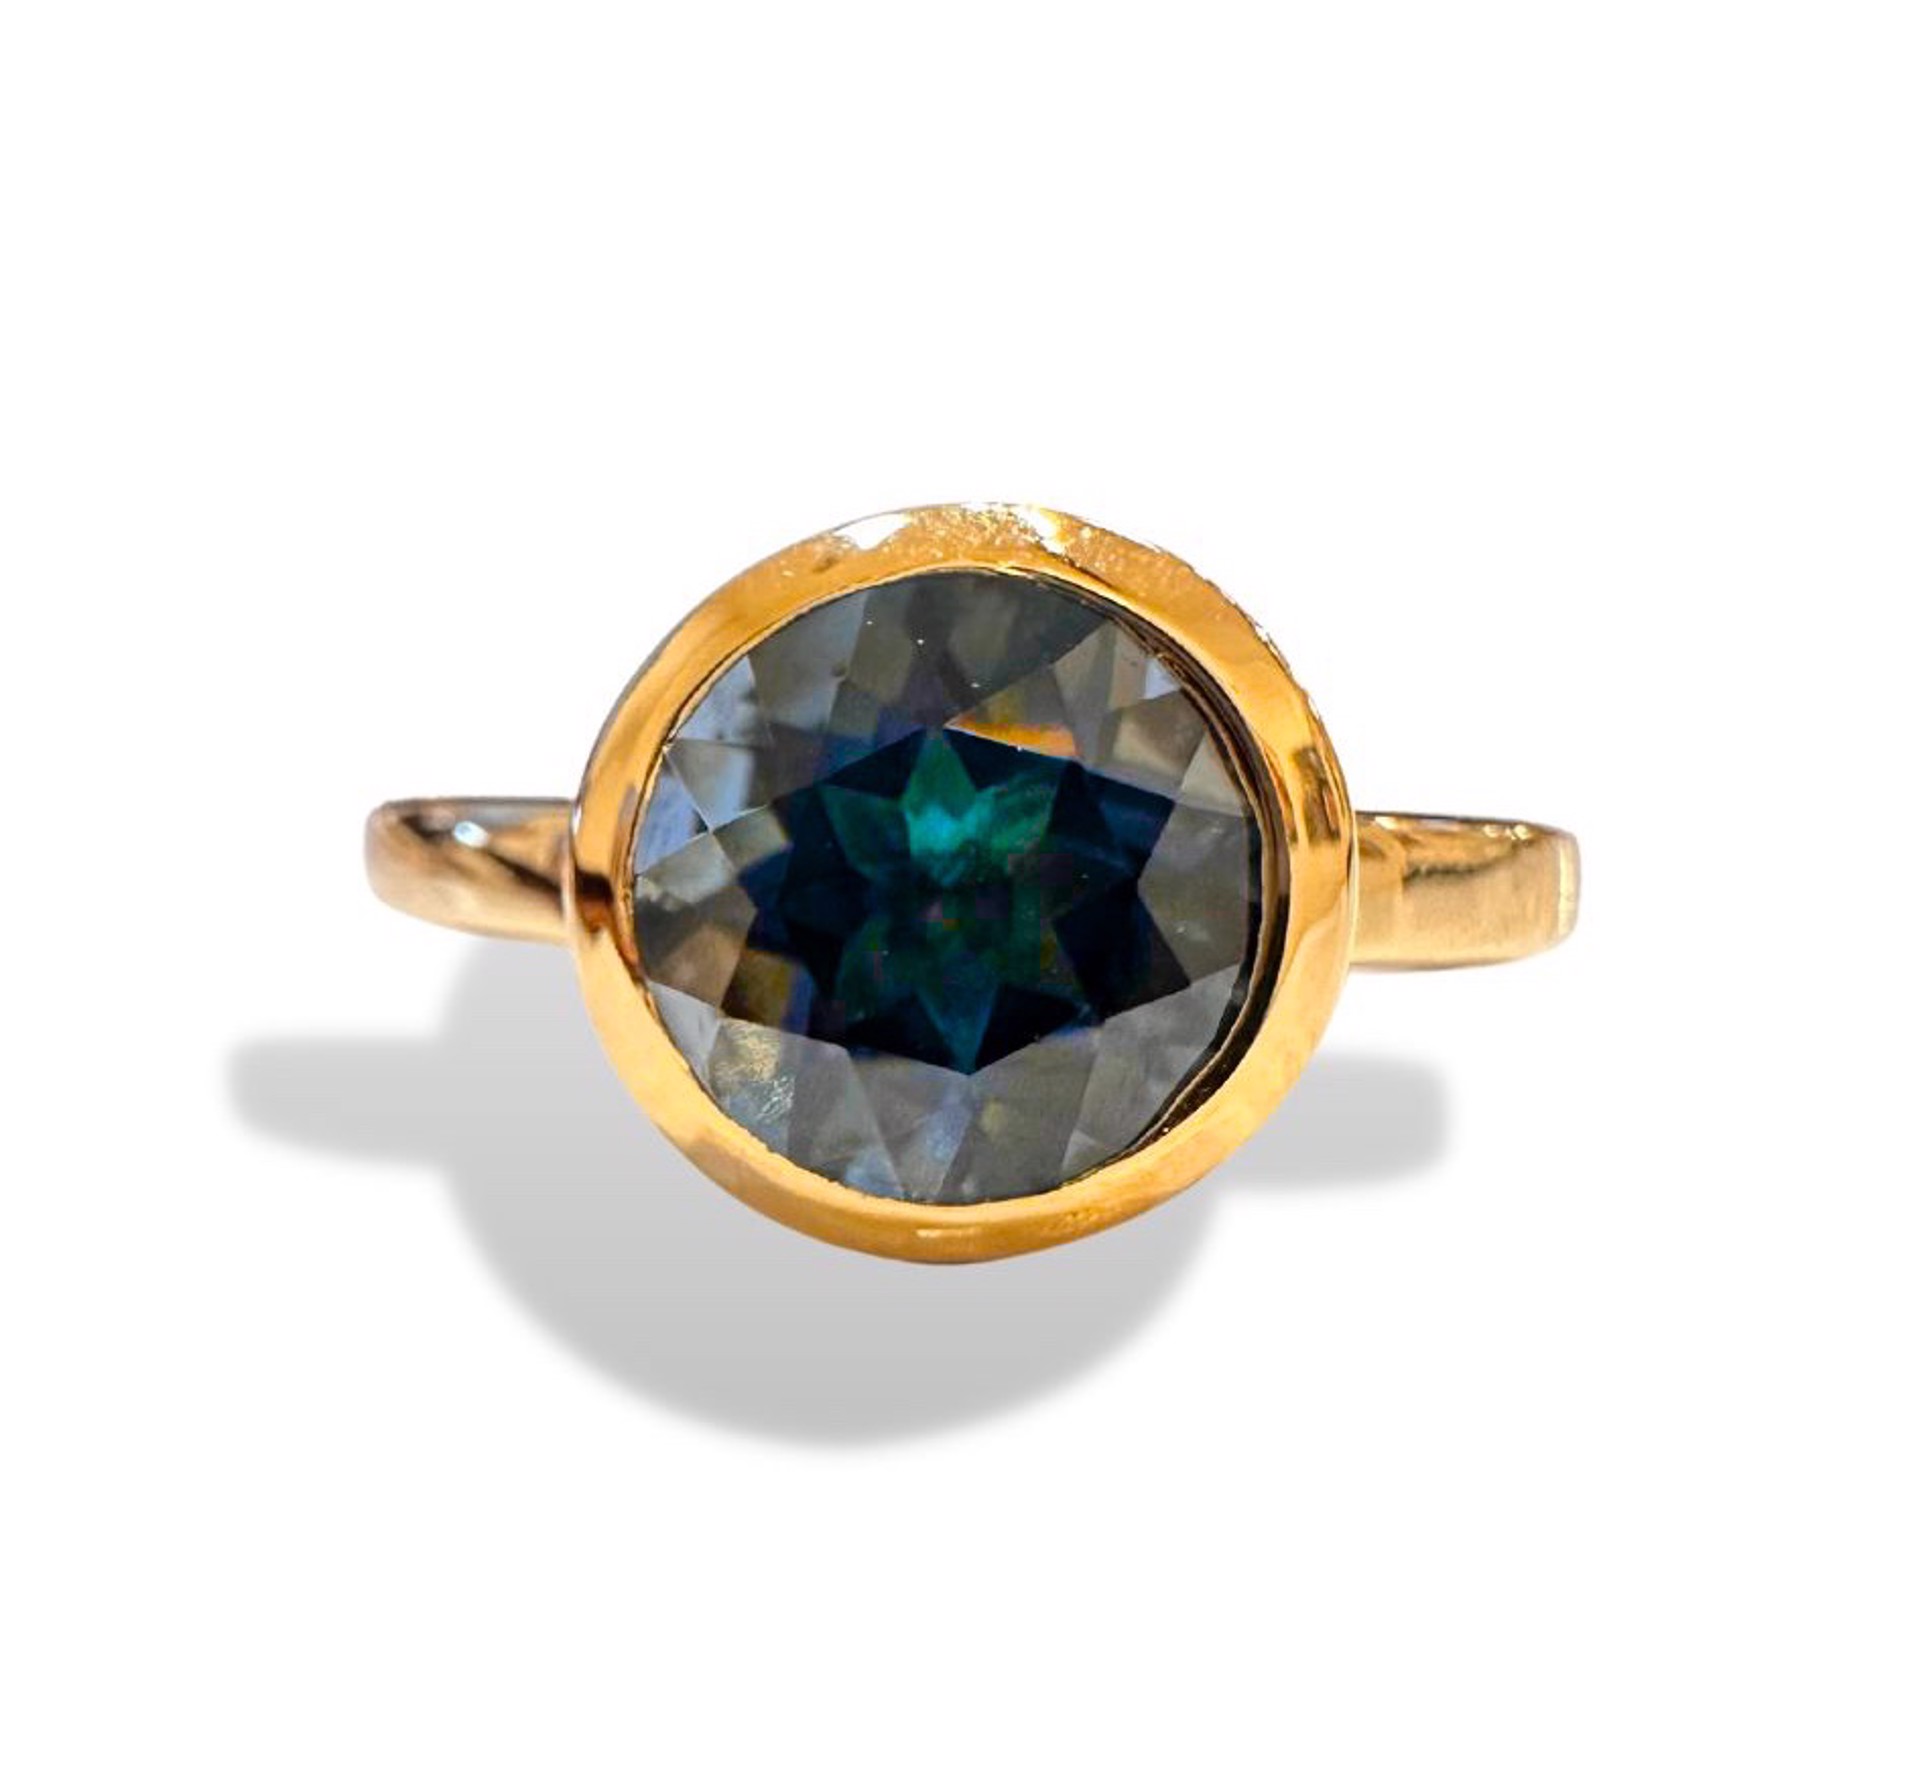 Ring - London Blue Topaz with 14kt Gold Surround Size 7.5 by Joryel Vera